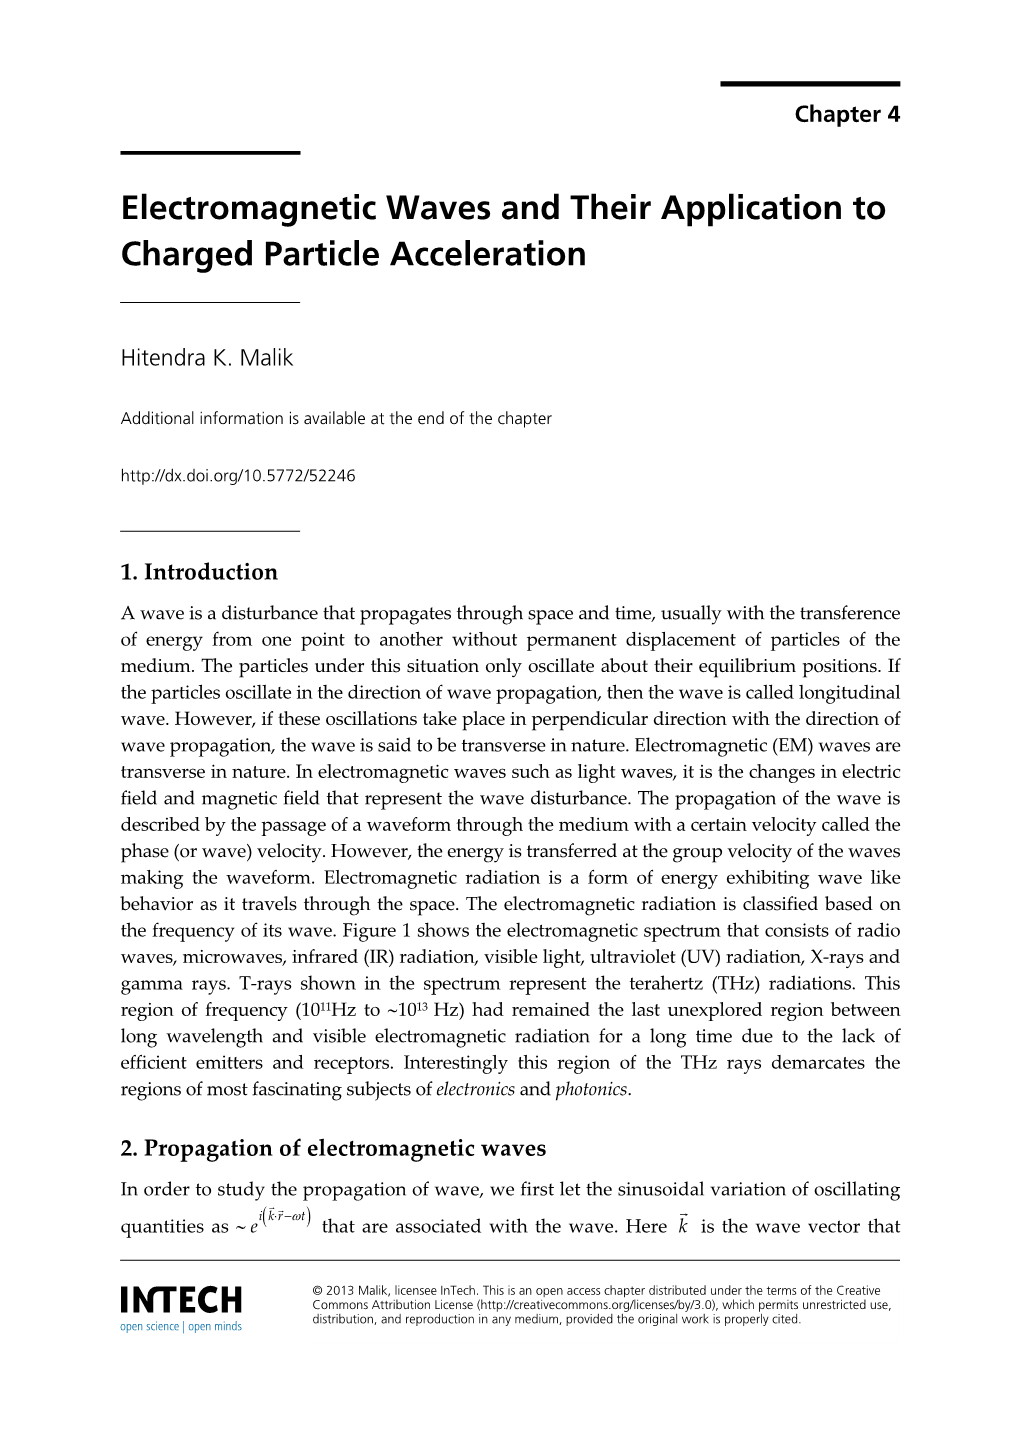 Electromagnetic Waves and Their Application to Charged Particle Acceleration